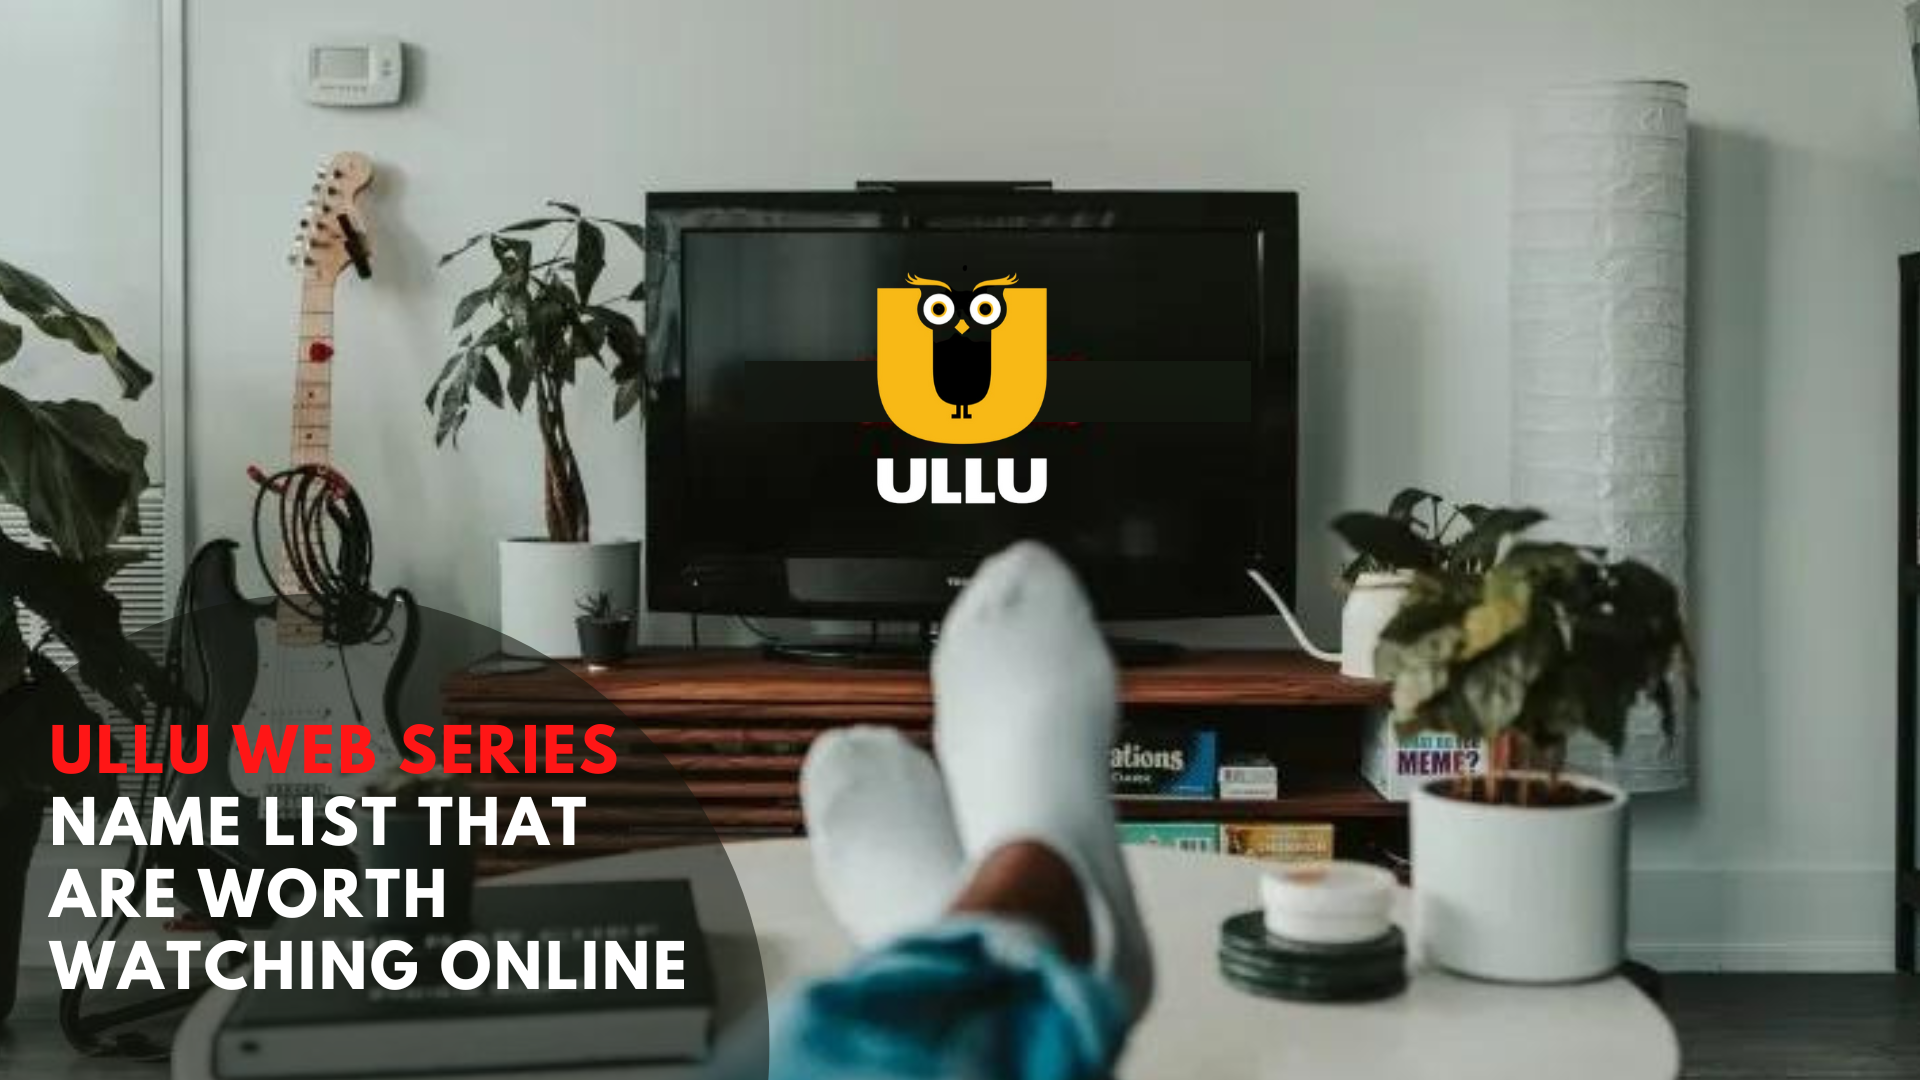 Ullu Web Series Name List That Are Worth Watching Online